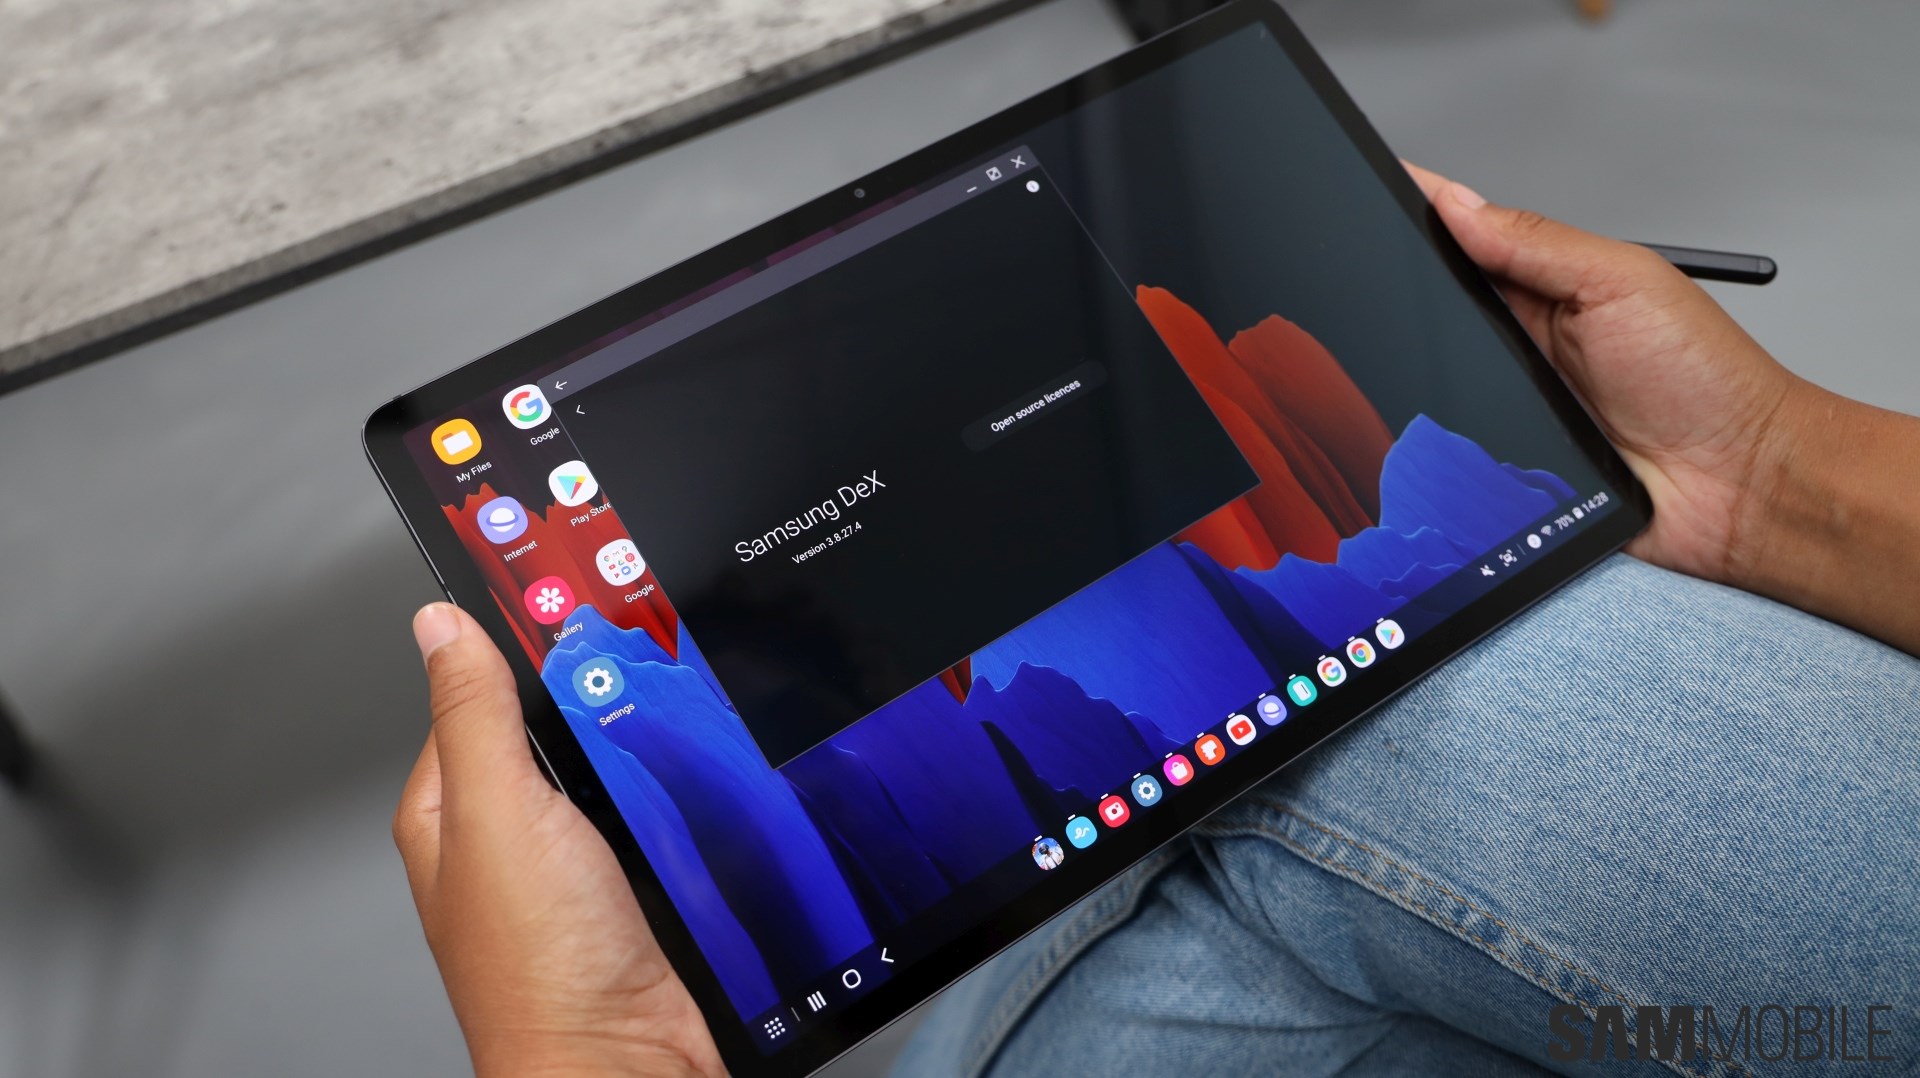 Best Samsung Galaxy Tablets In January 2022 Picked By Experts Sammobile